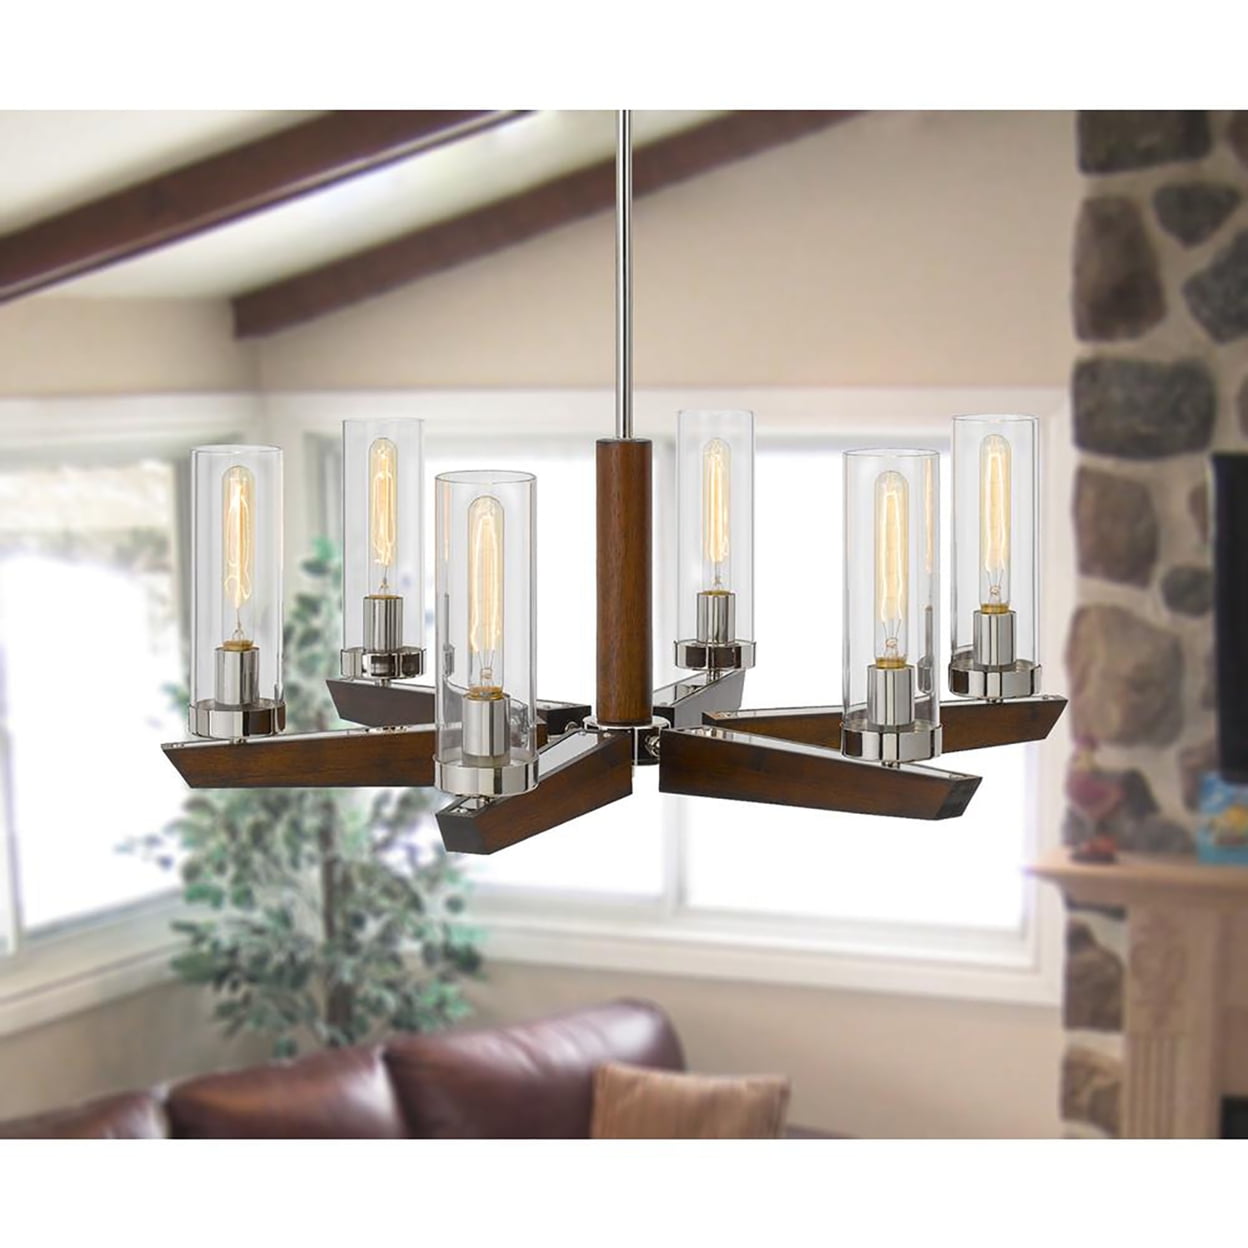 FX-3756-6 60 watt x 6 Ercolano Pine Wood & Metal Chandelier with Clear Glass Shade, Wood & Brushed Steel -  Cal Lighting